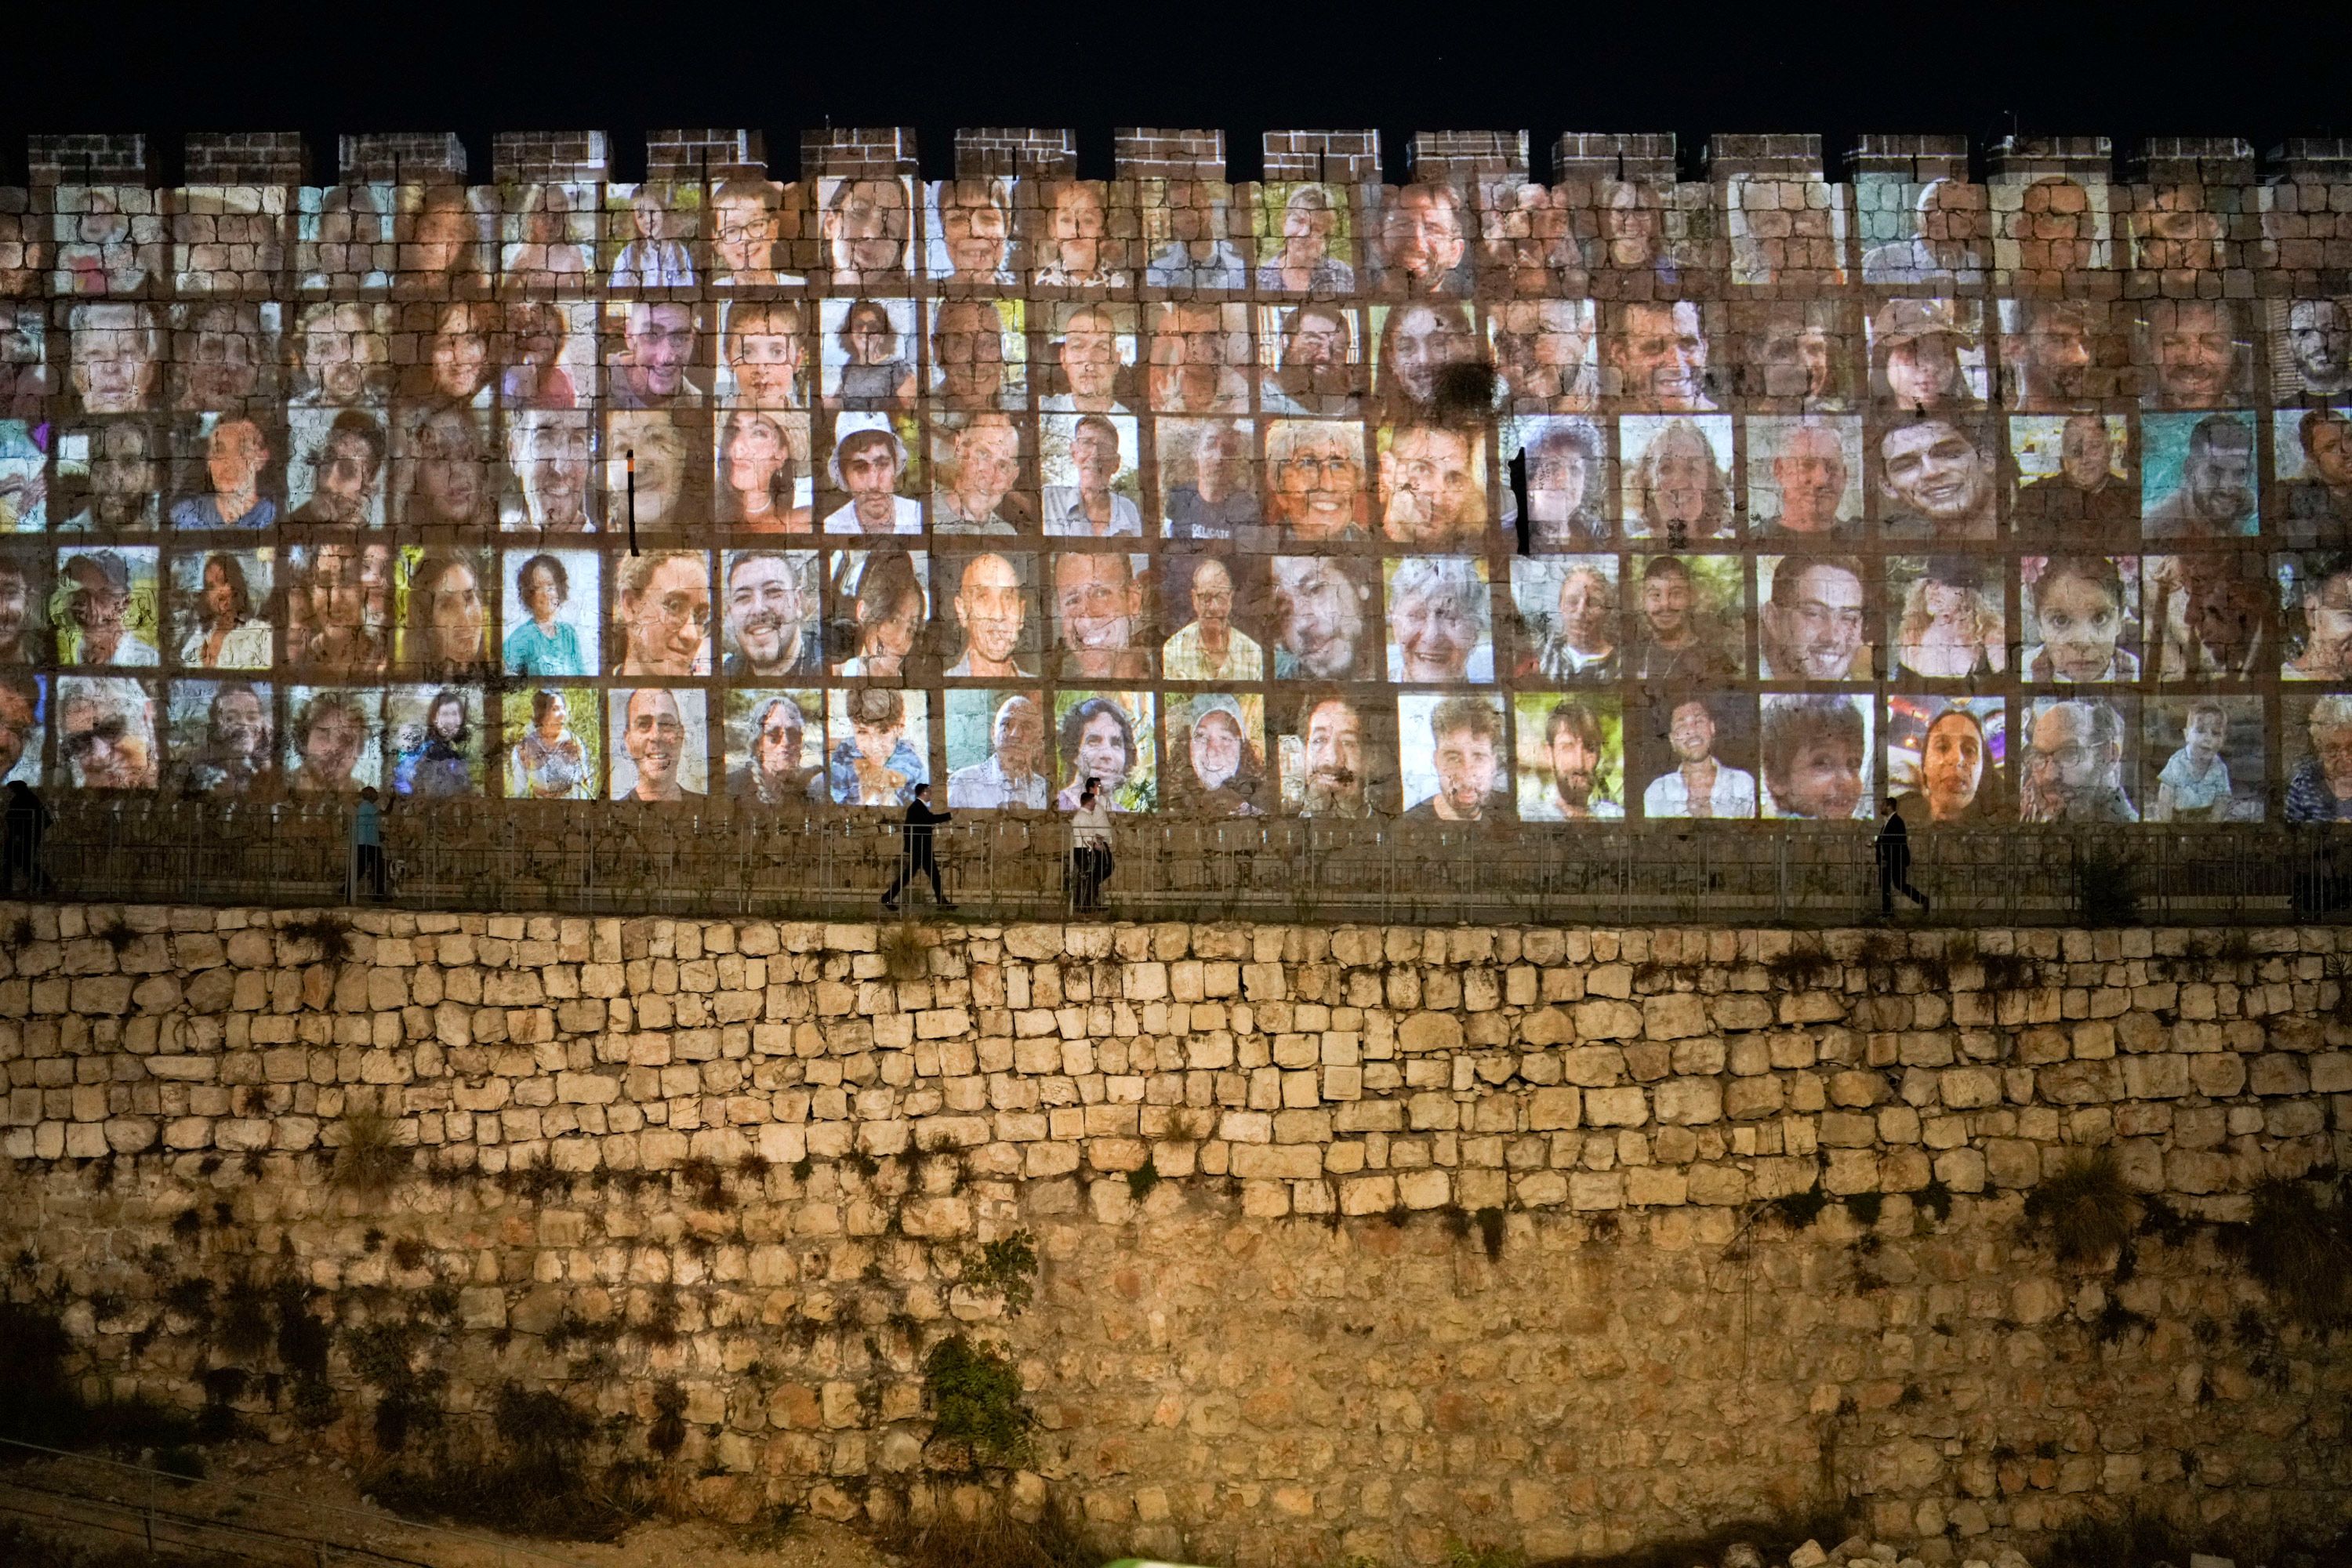 Photographs of Israeli hostages being held by Hamas militants are projected onto the walls of Jerusalem's Old City on November 6.